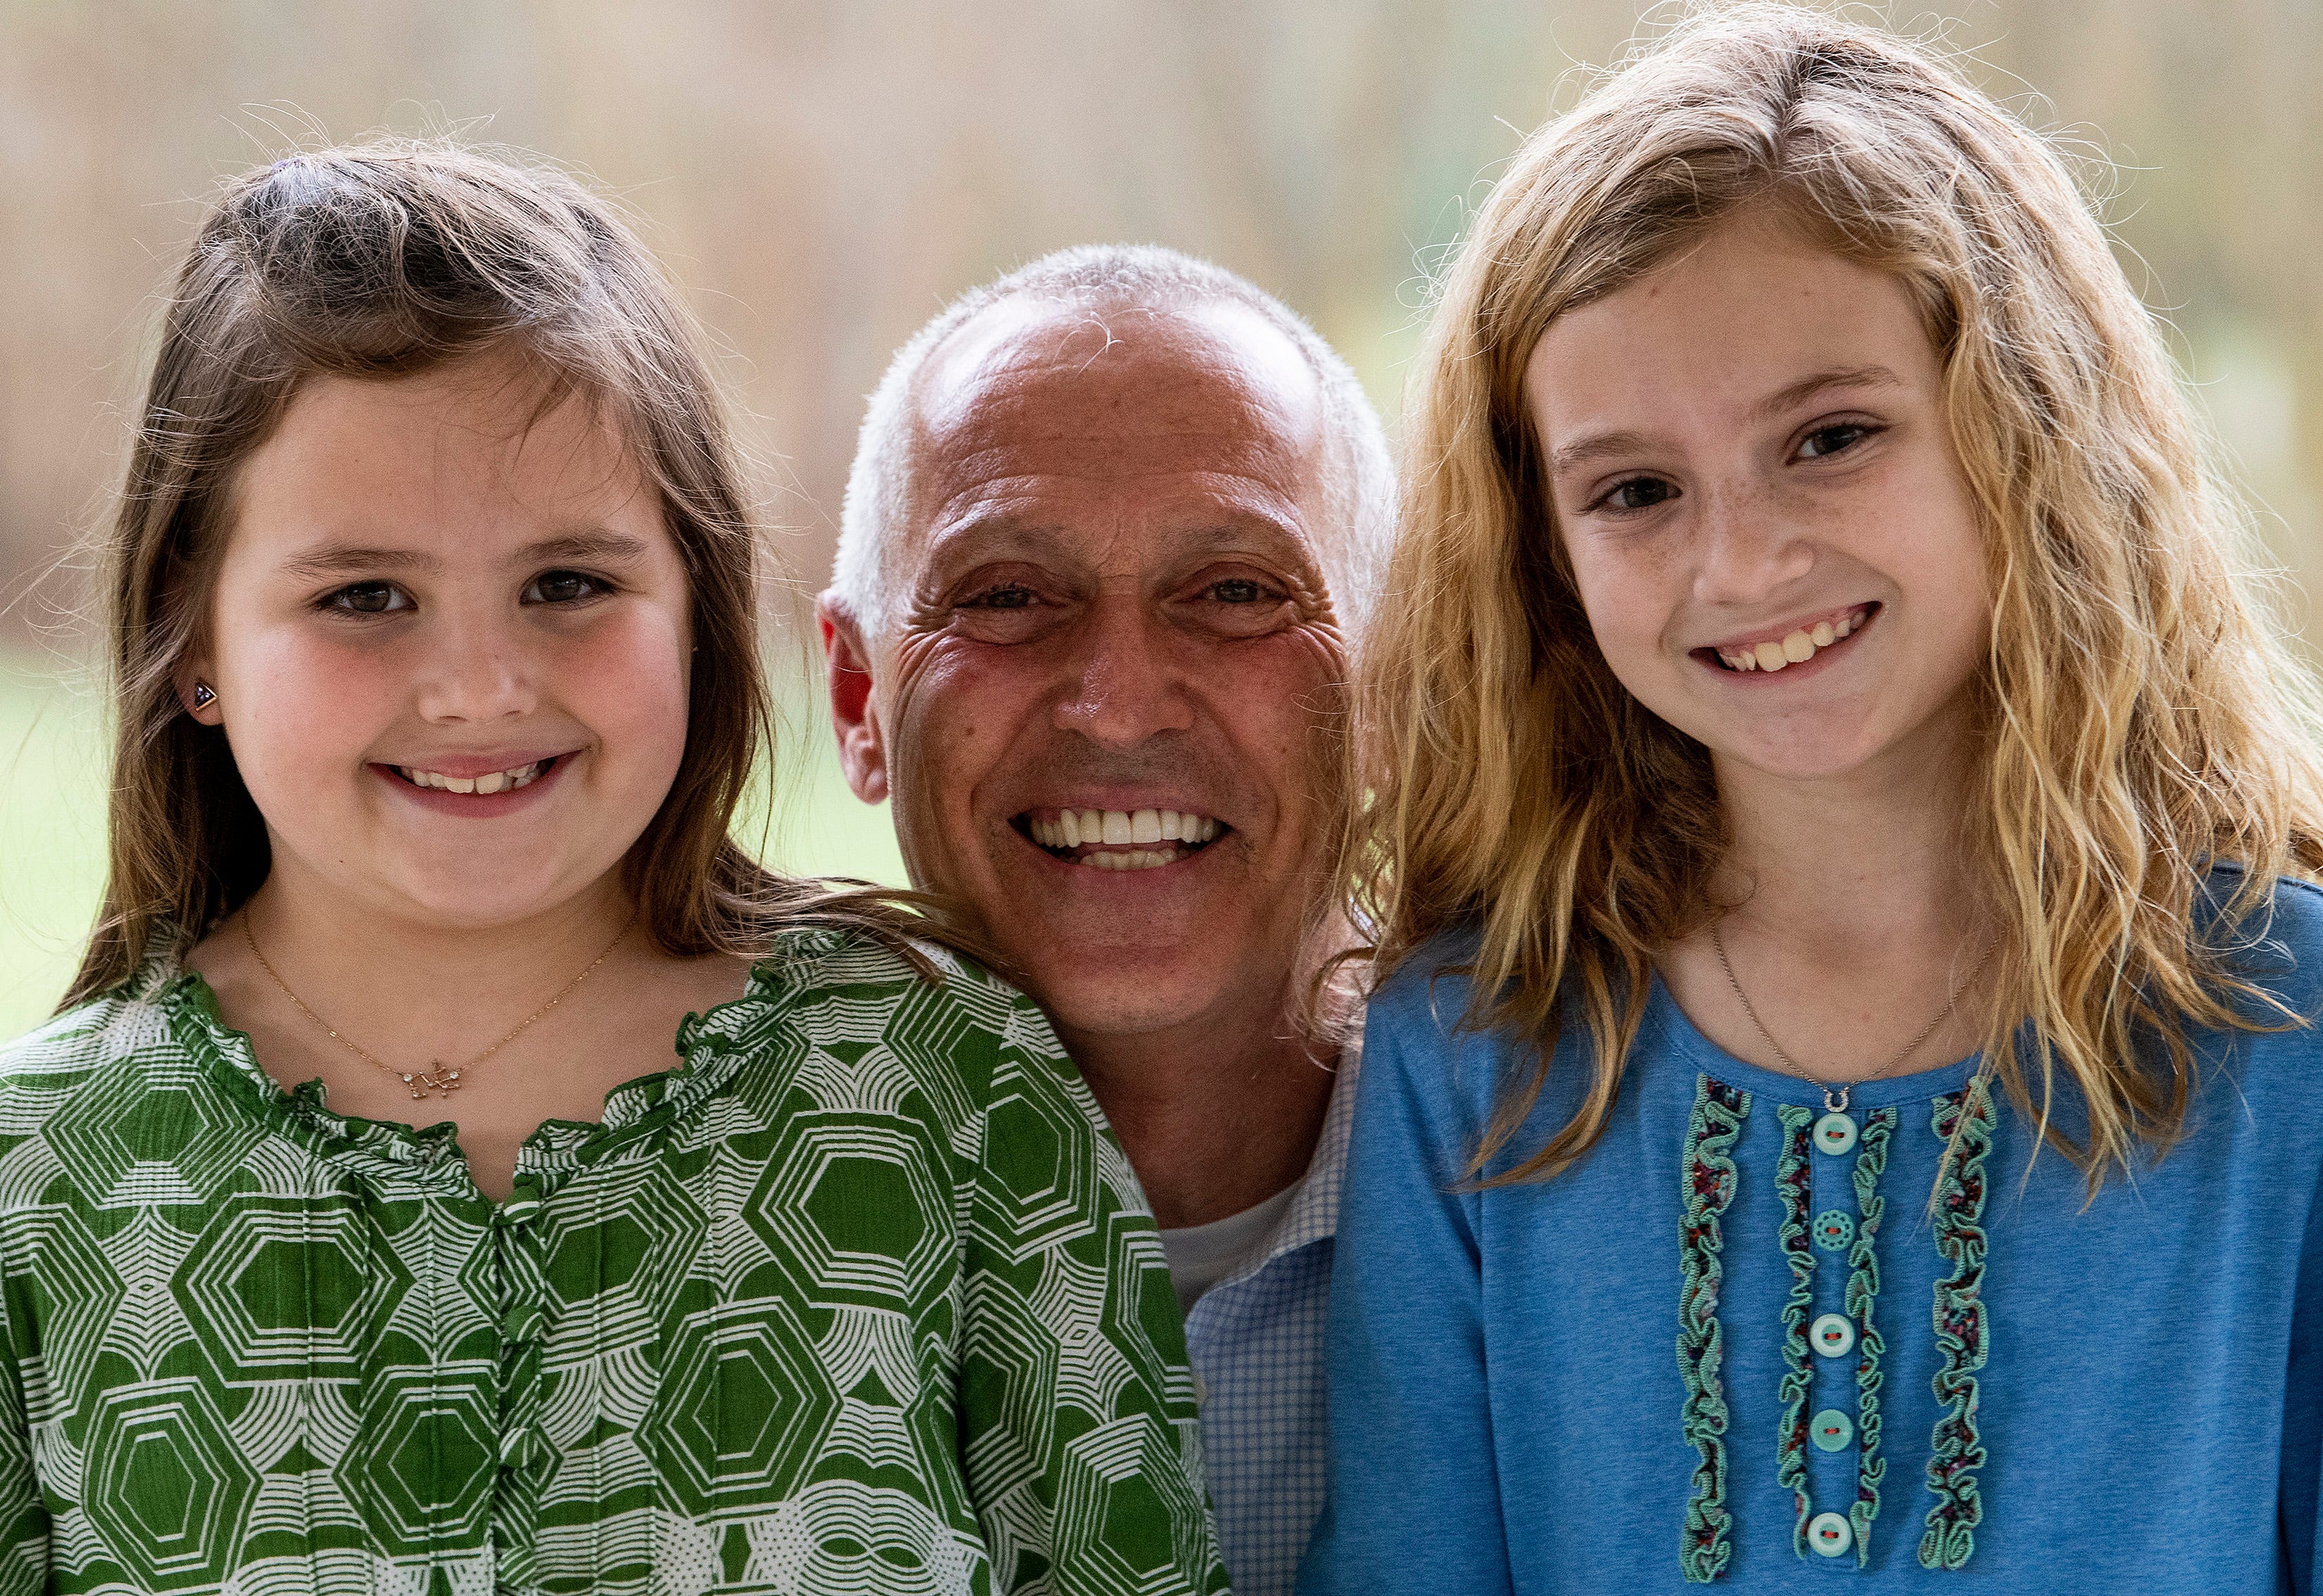 Tom Pieplow smiles with his granddaughters Mallory Sharman, left, and Ella Peyton Sharman, right, at Kiesel Park in Auburn, Ala., on Tuesday March 16, 2021. Pieplow recently received his COVID19 vaccines and can once again spend time with his grandchildren.